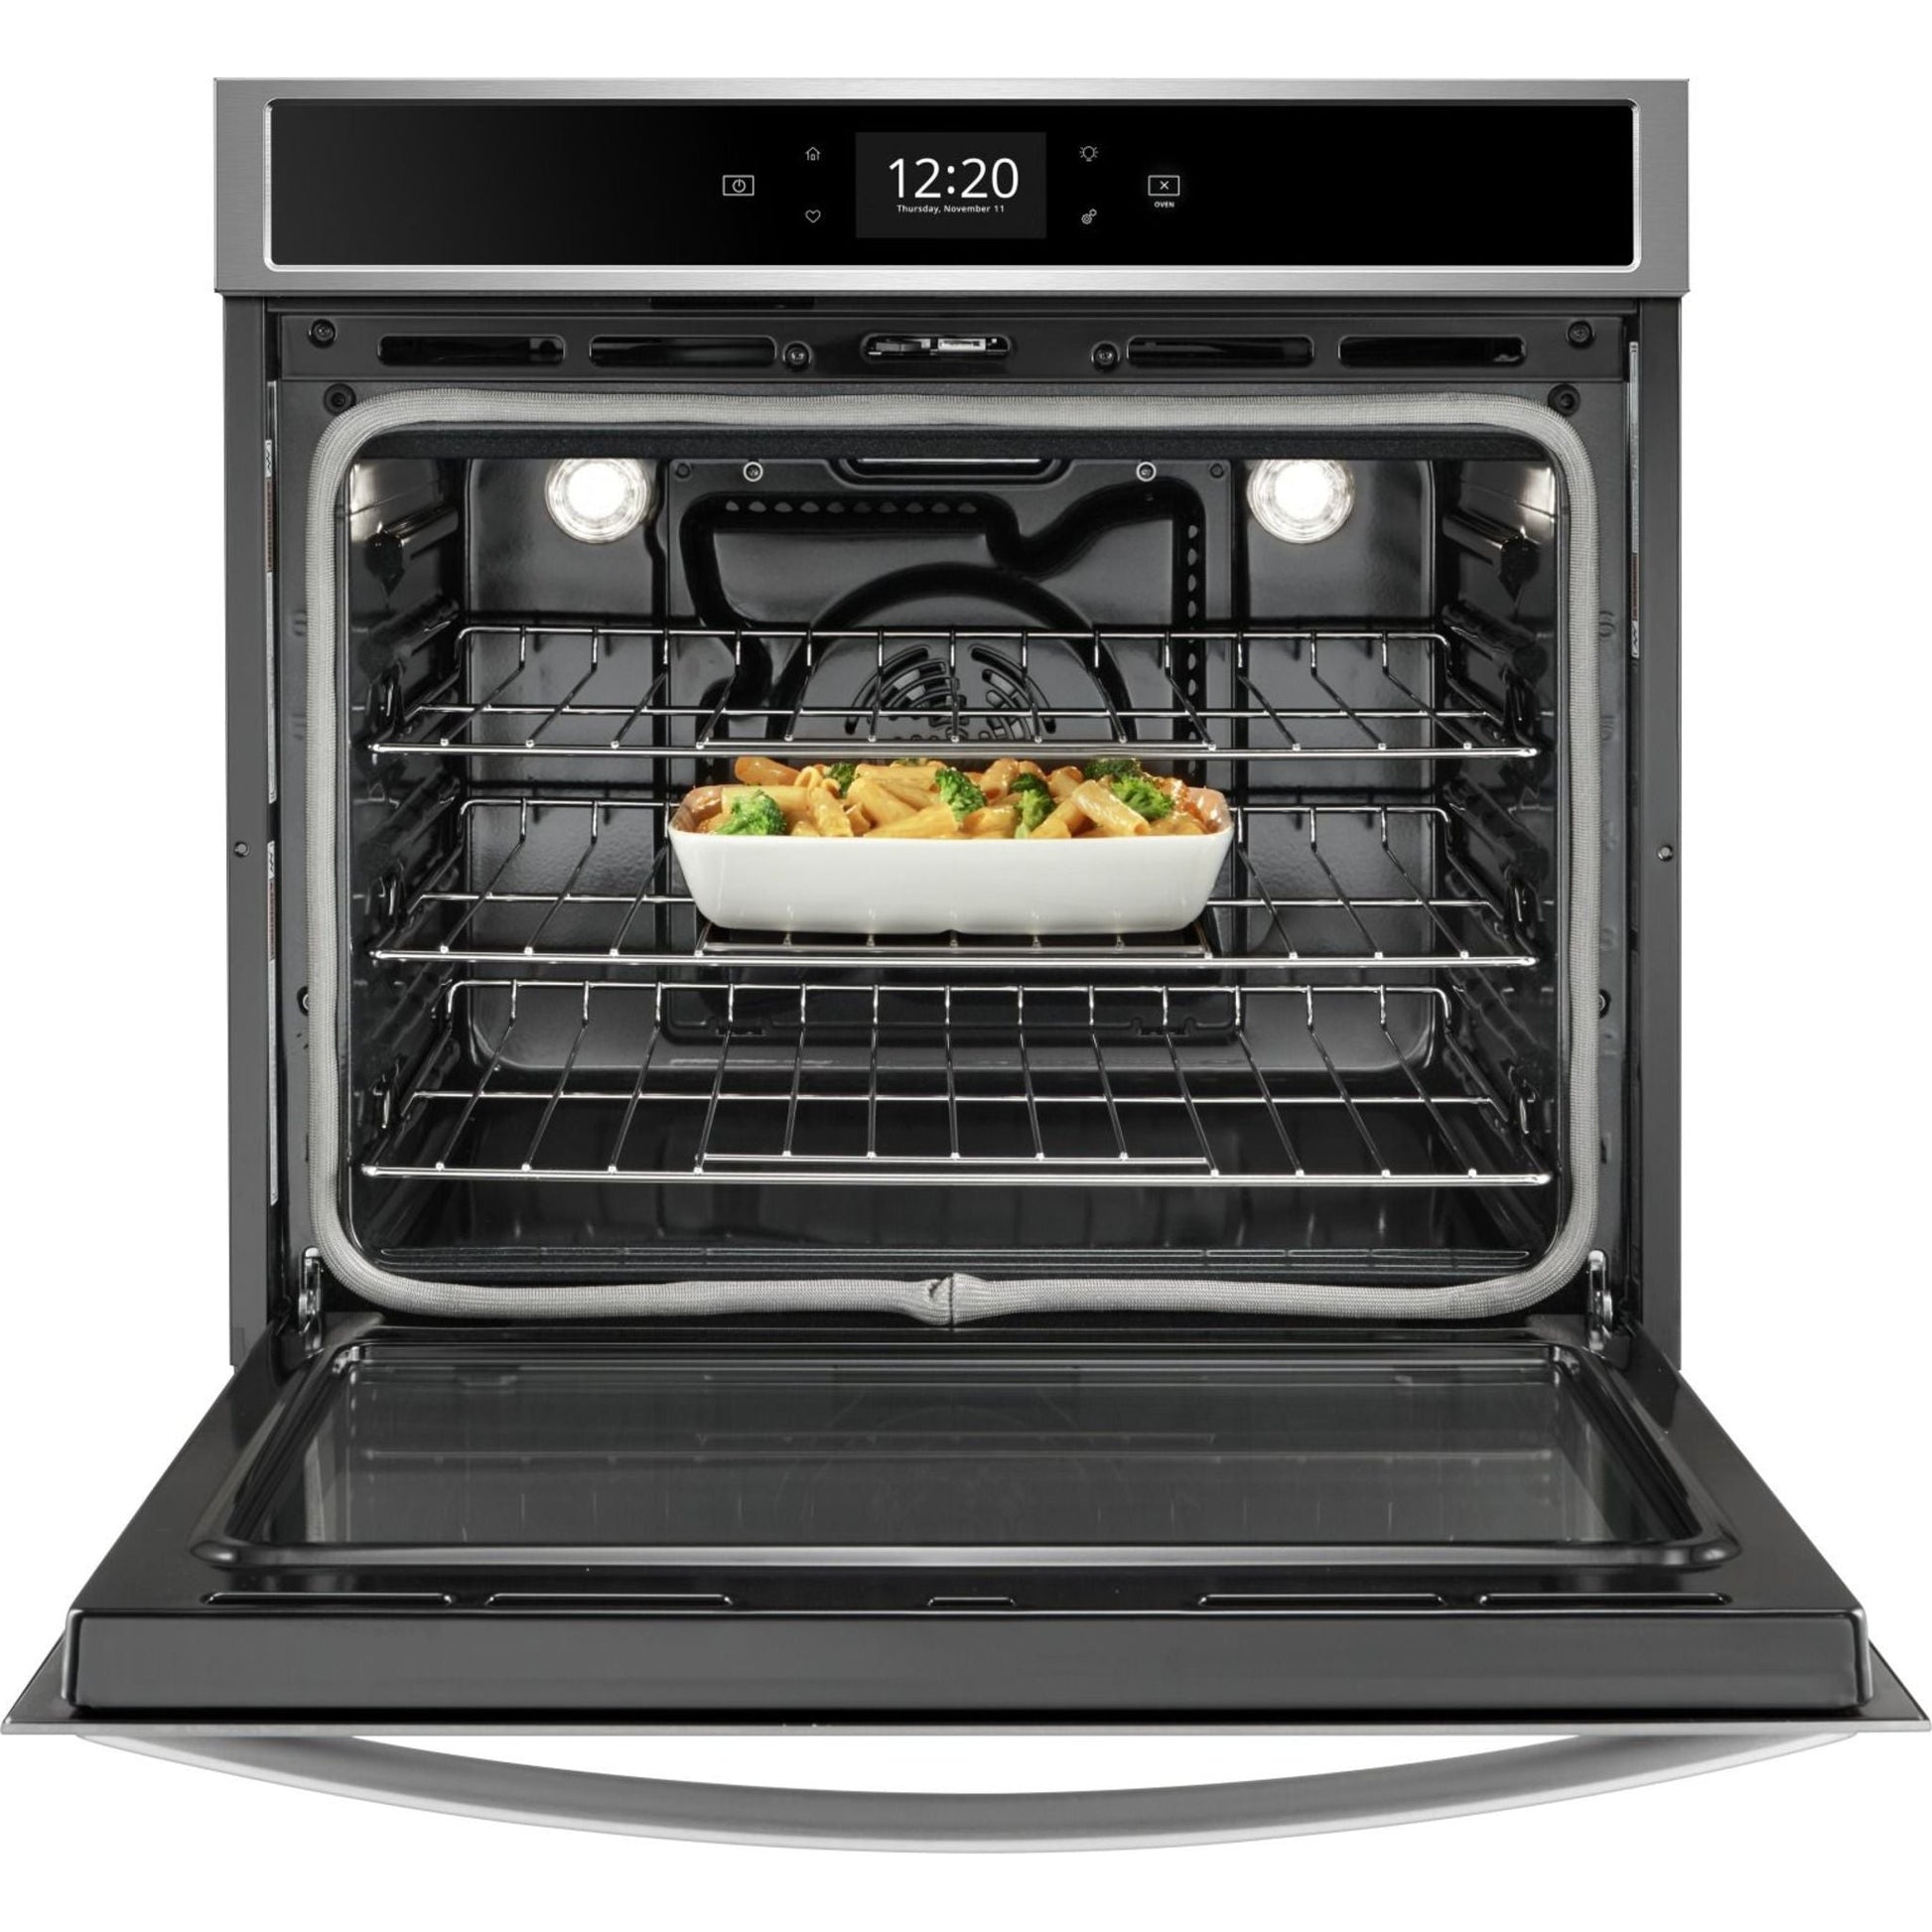 Whirlpool 27" Convection Wall Oven (WOS72EC7HV) - Black Stainless